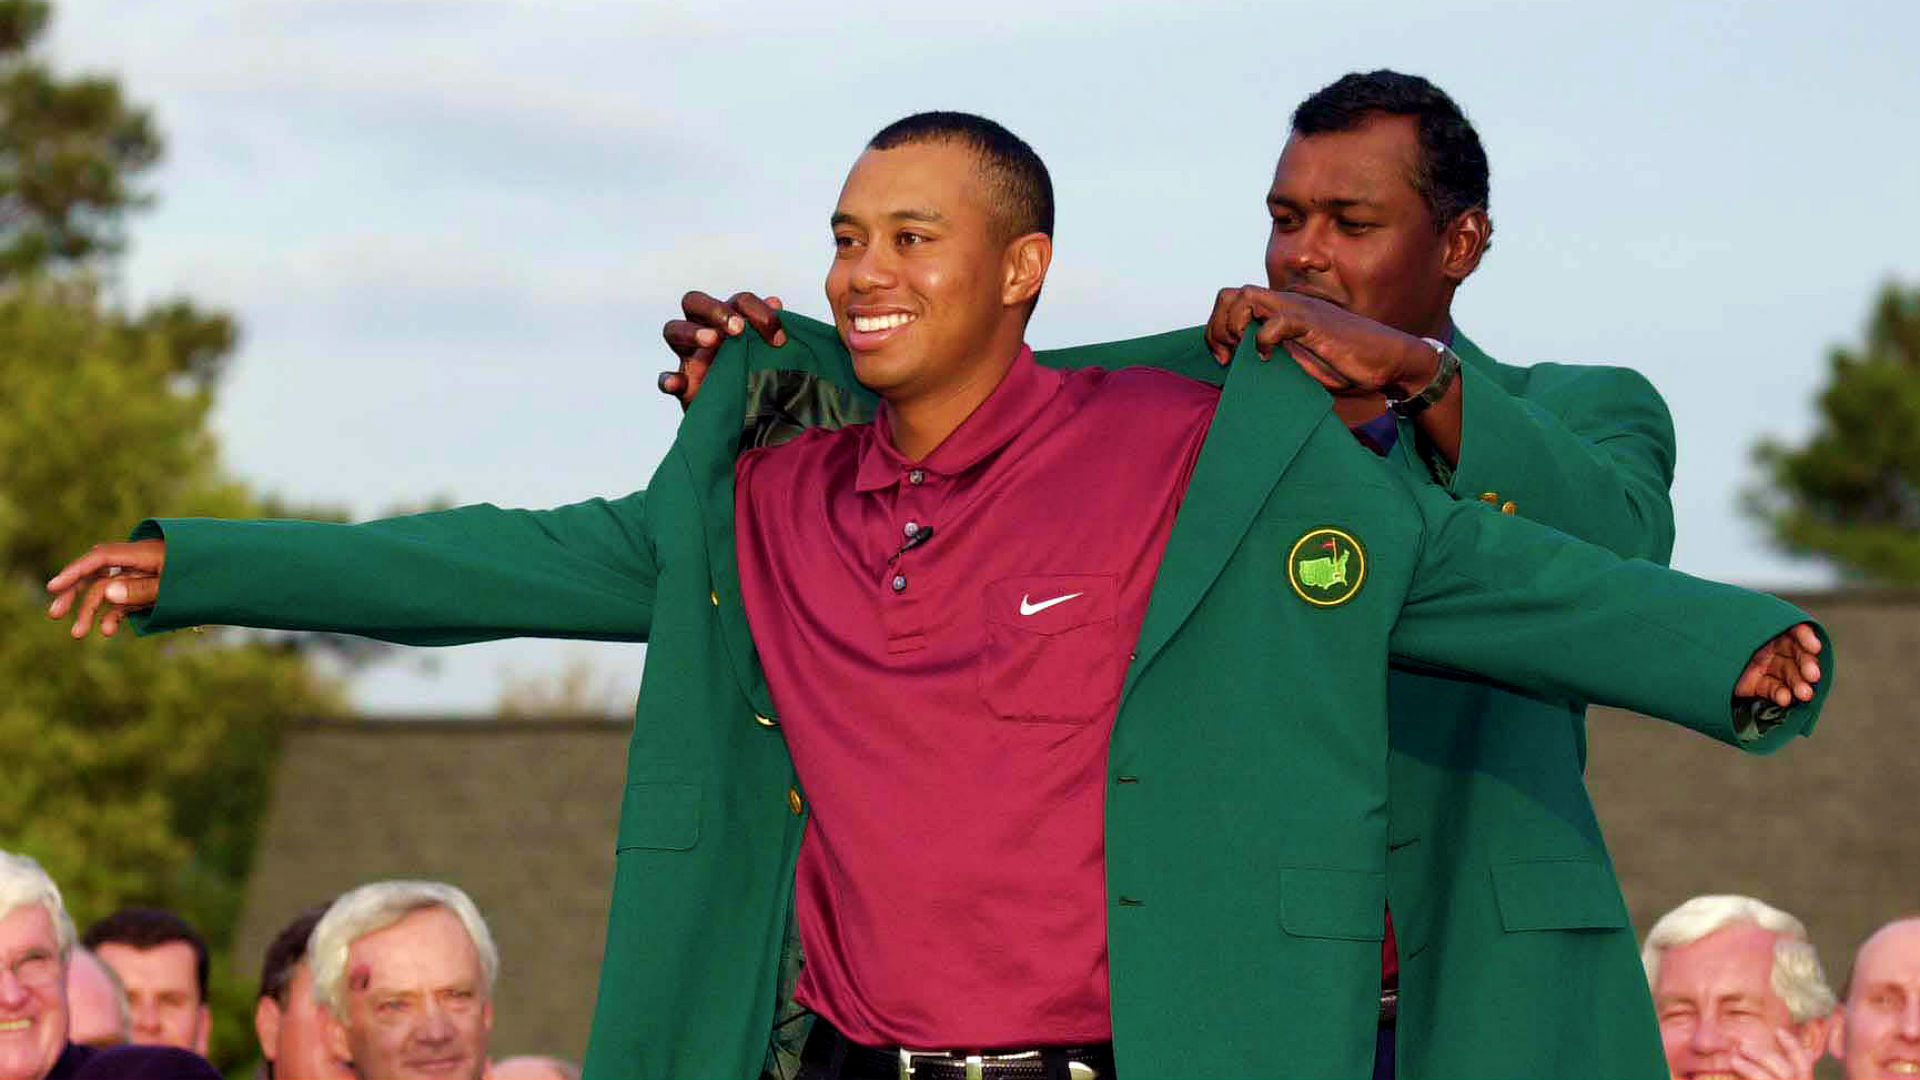 Tiger Woods' history and wins at The Masters Golf Sporting News